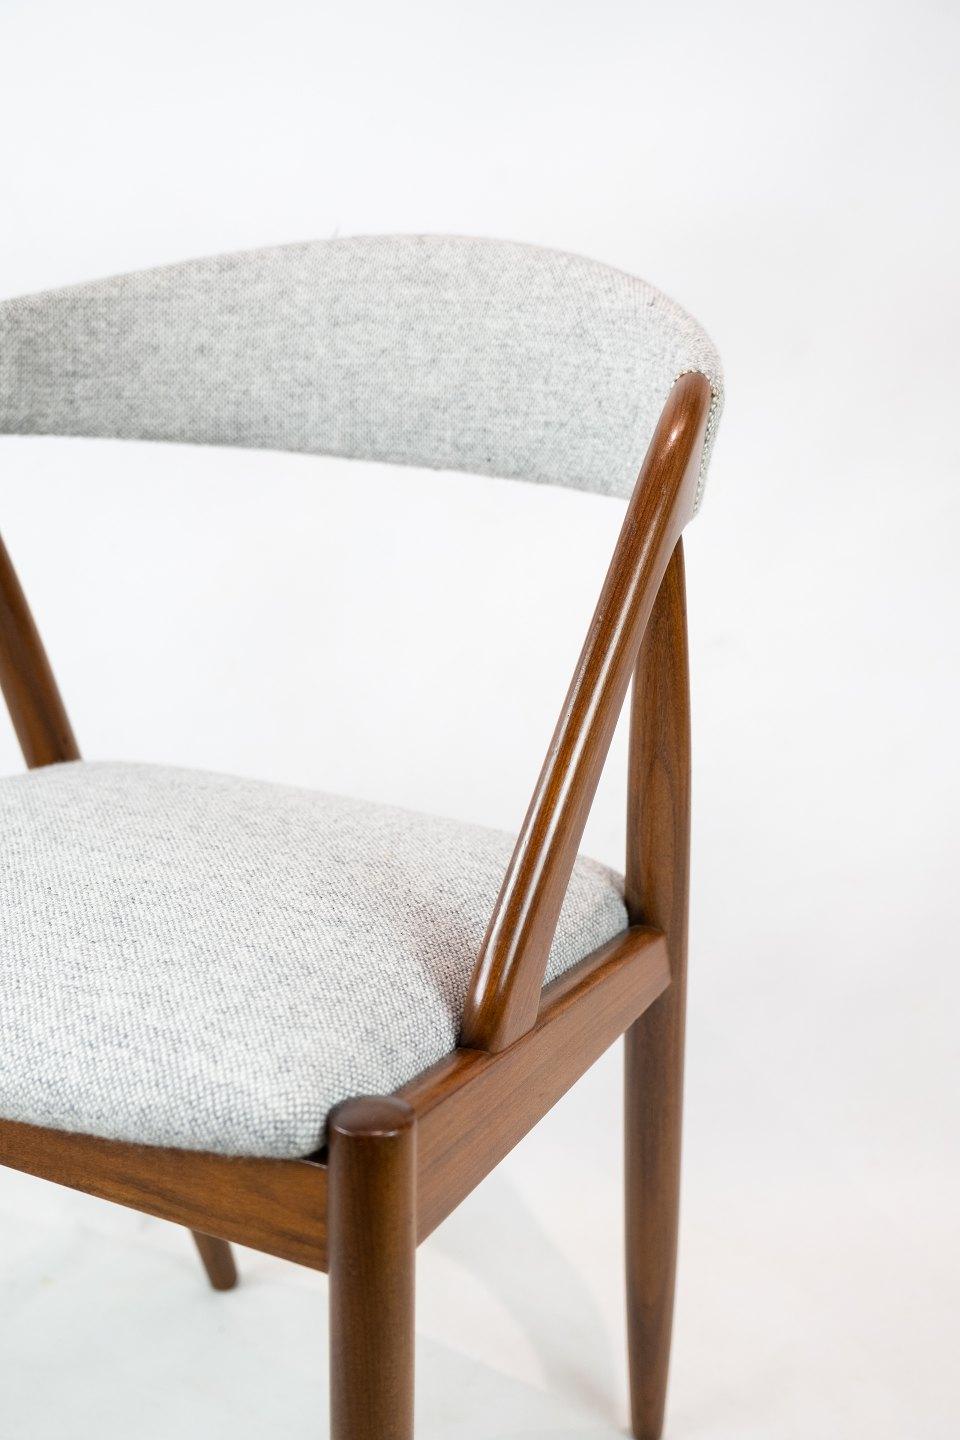 Set of Six Dining Room Chairs, Model 31, Designed by Kai Kristiansen 1